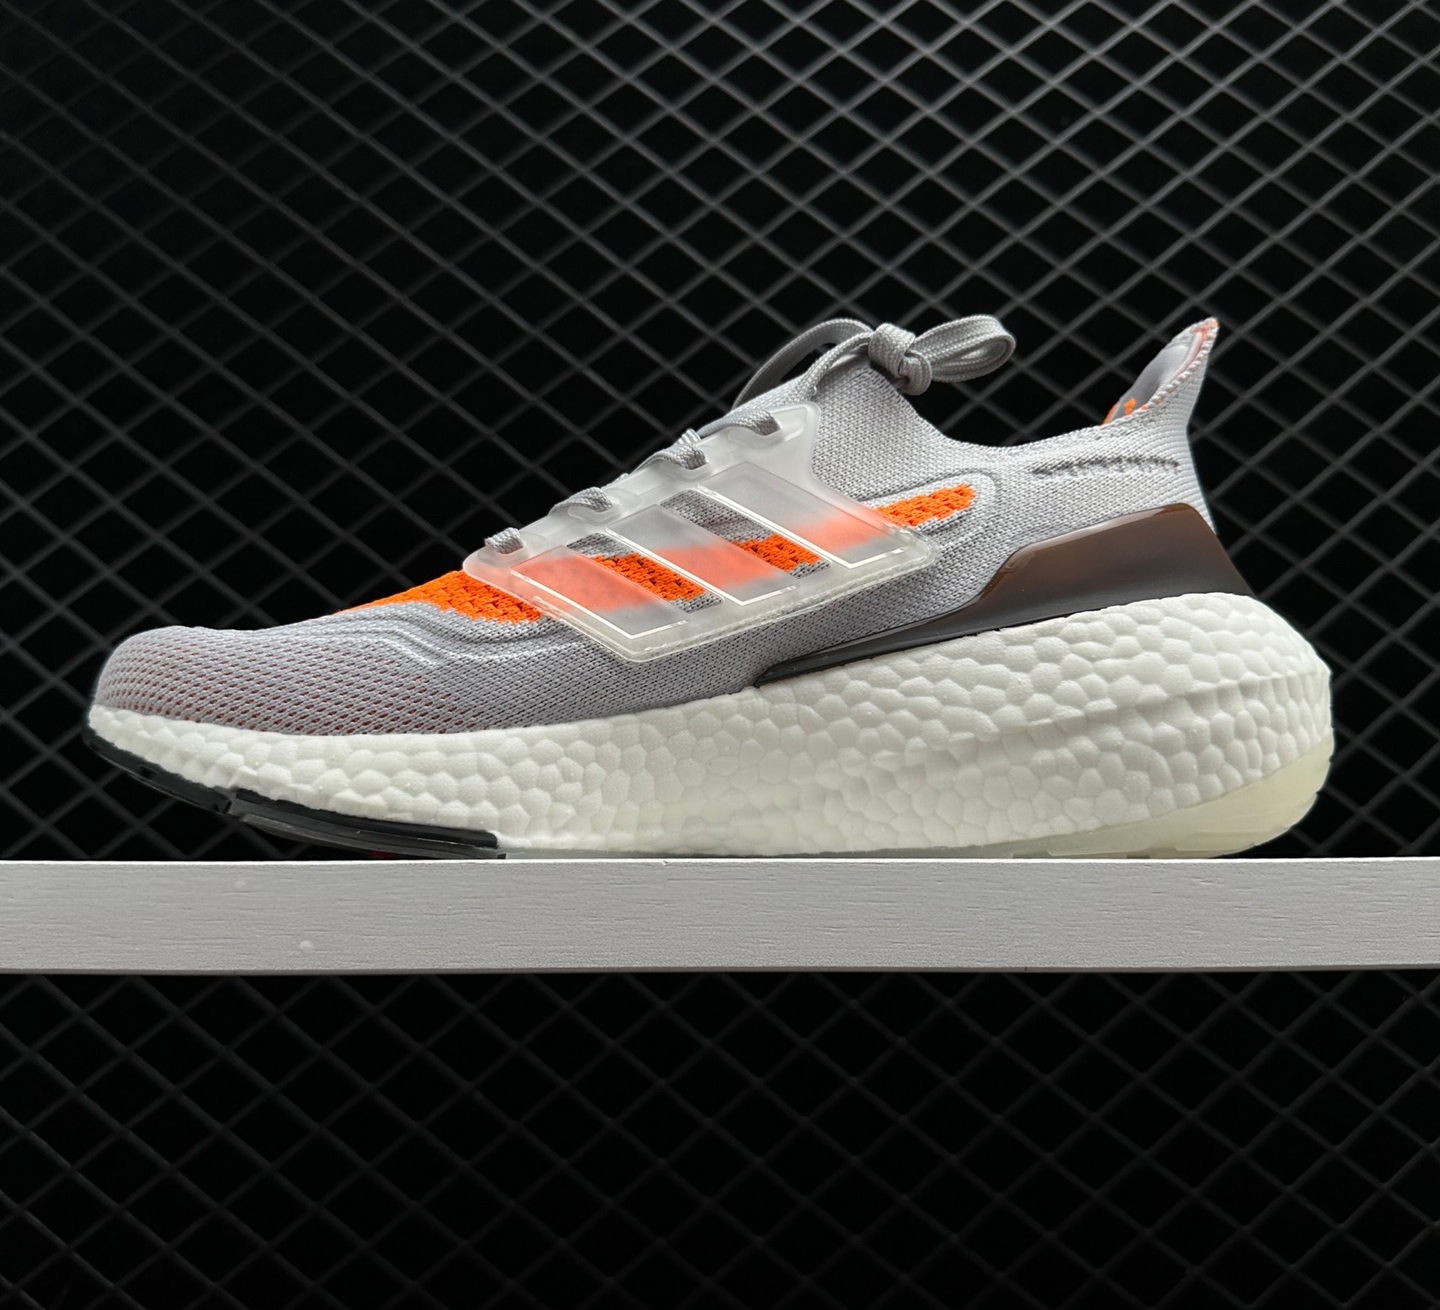 Adidas Ultra Boost 21 Dash Grey Screaming Orange FY0375 - Unmatched Style and Performance